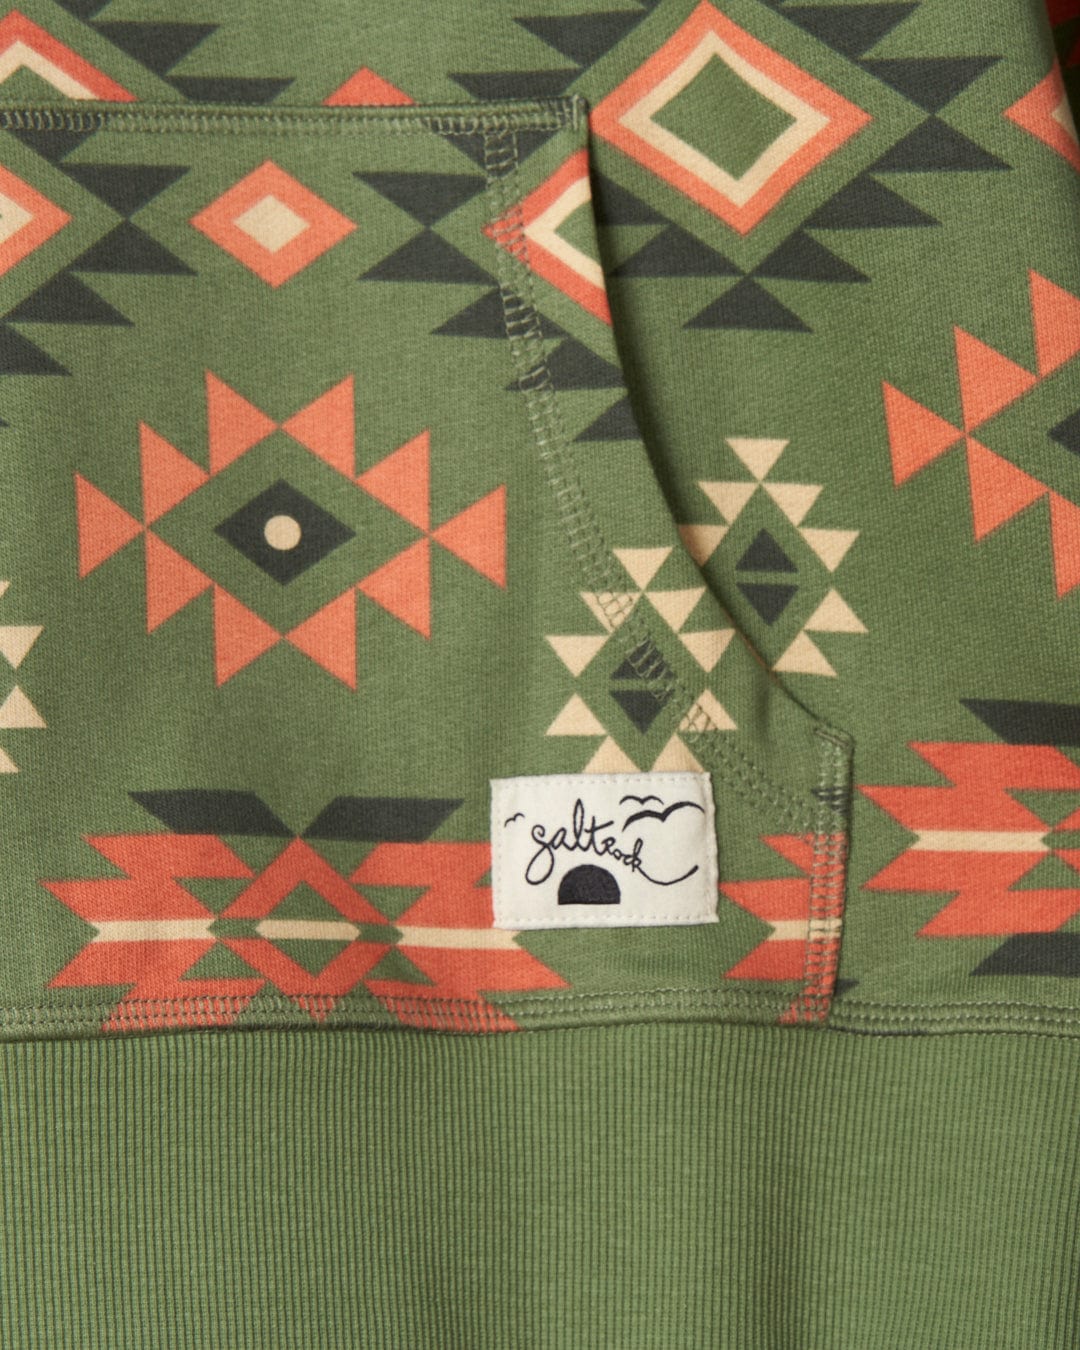 A green hoodie with an Aztec Santano print pattern by Saltrock.